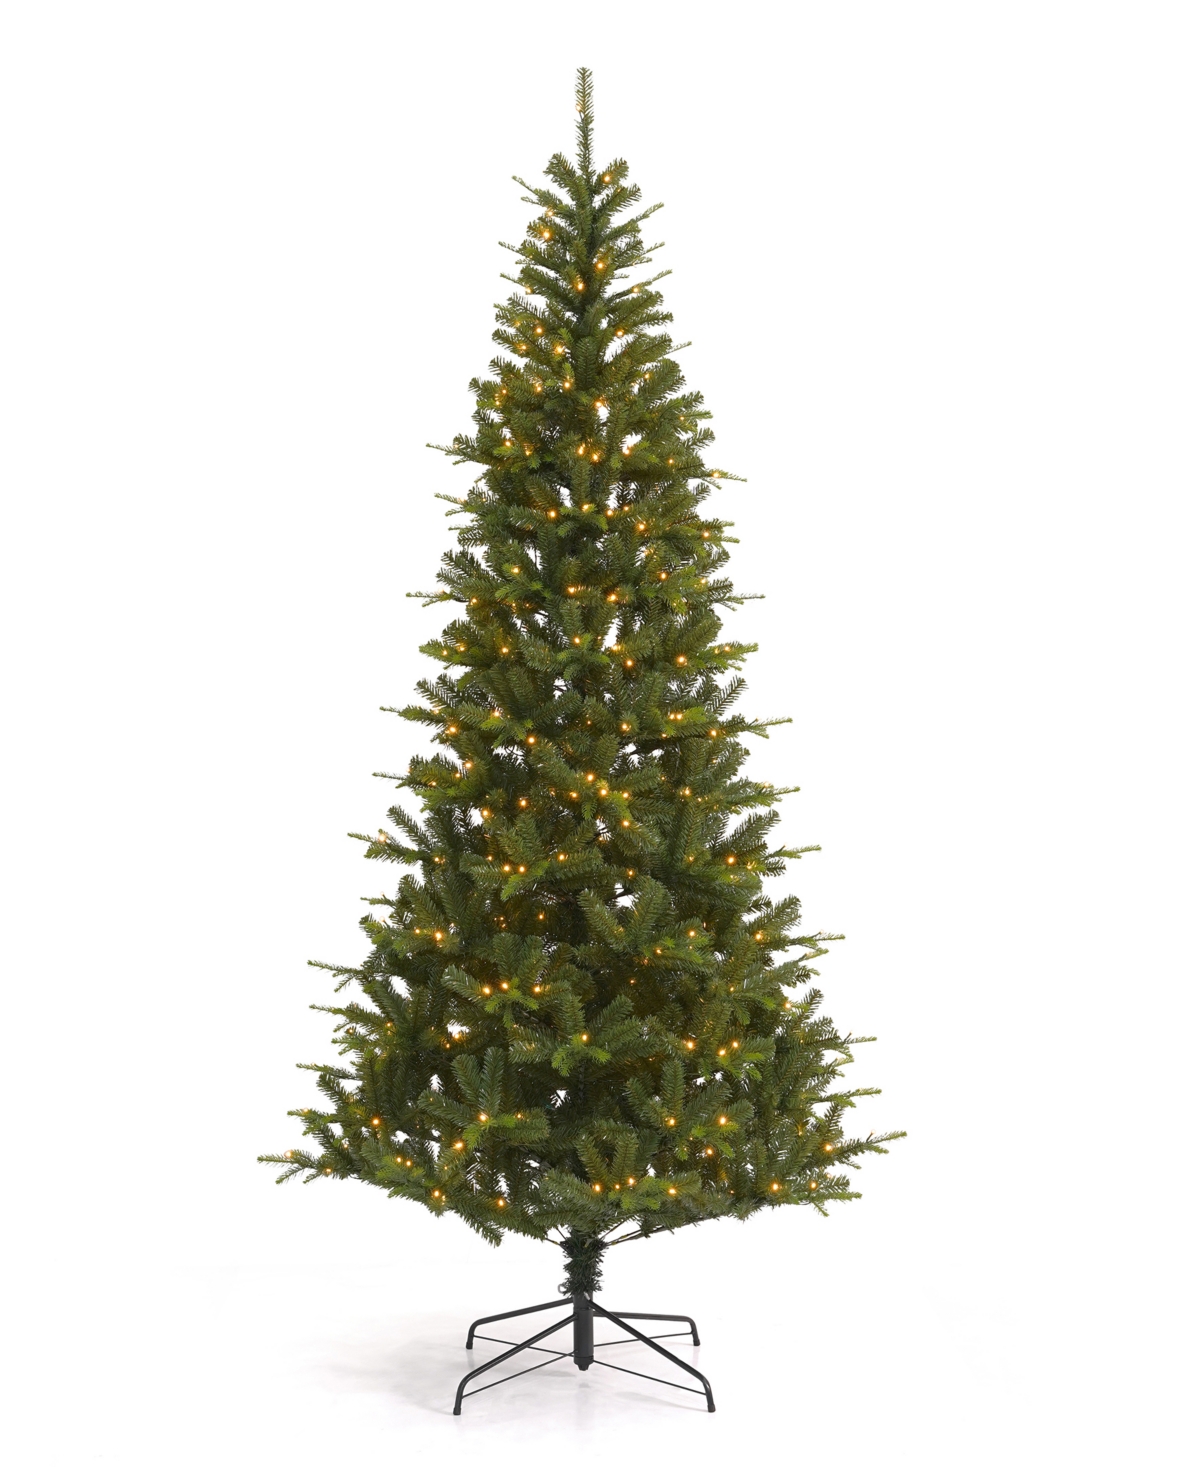 Valley Pine 9' Pre-Lit Pe, Pvc Tree with Metal Stand, 1467 Tips, 550 Led Lights - Green